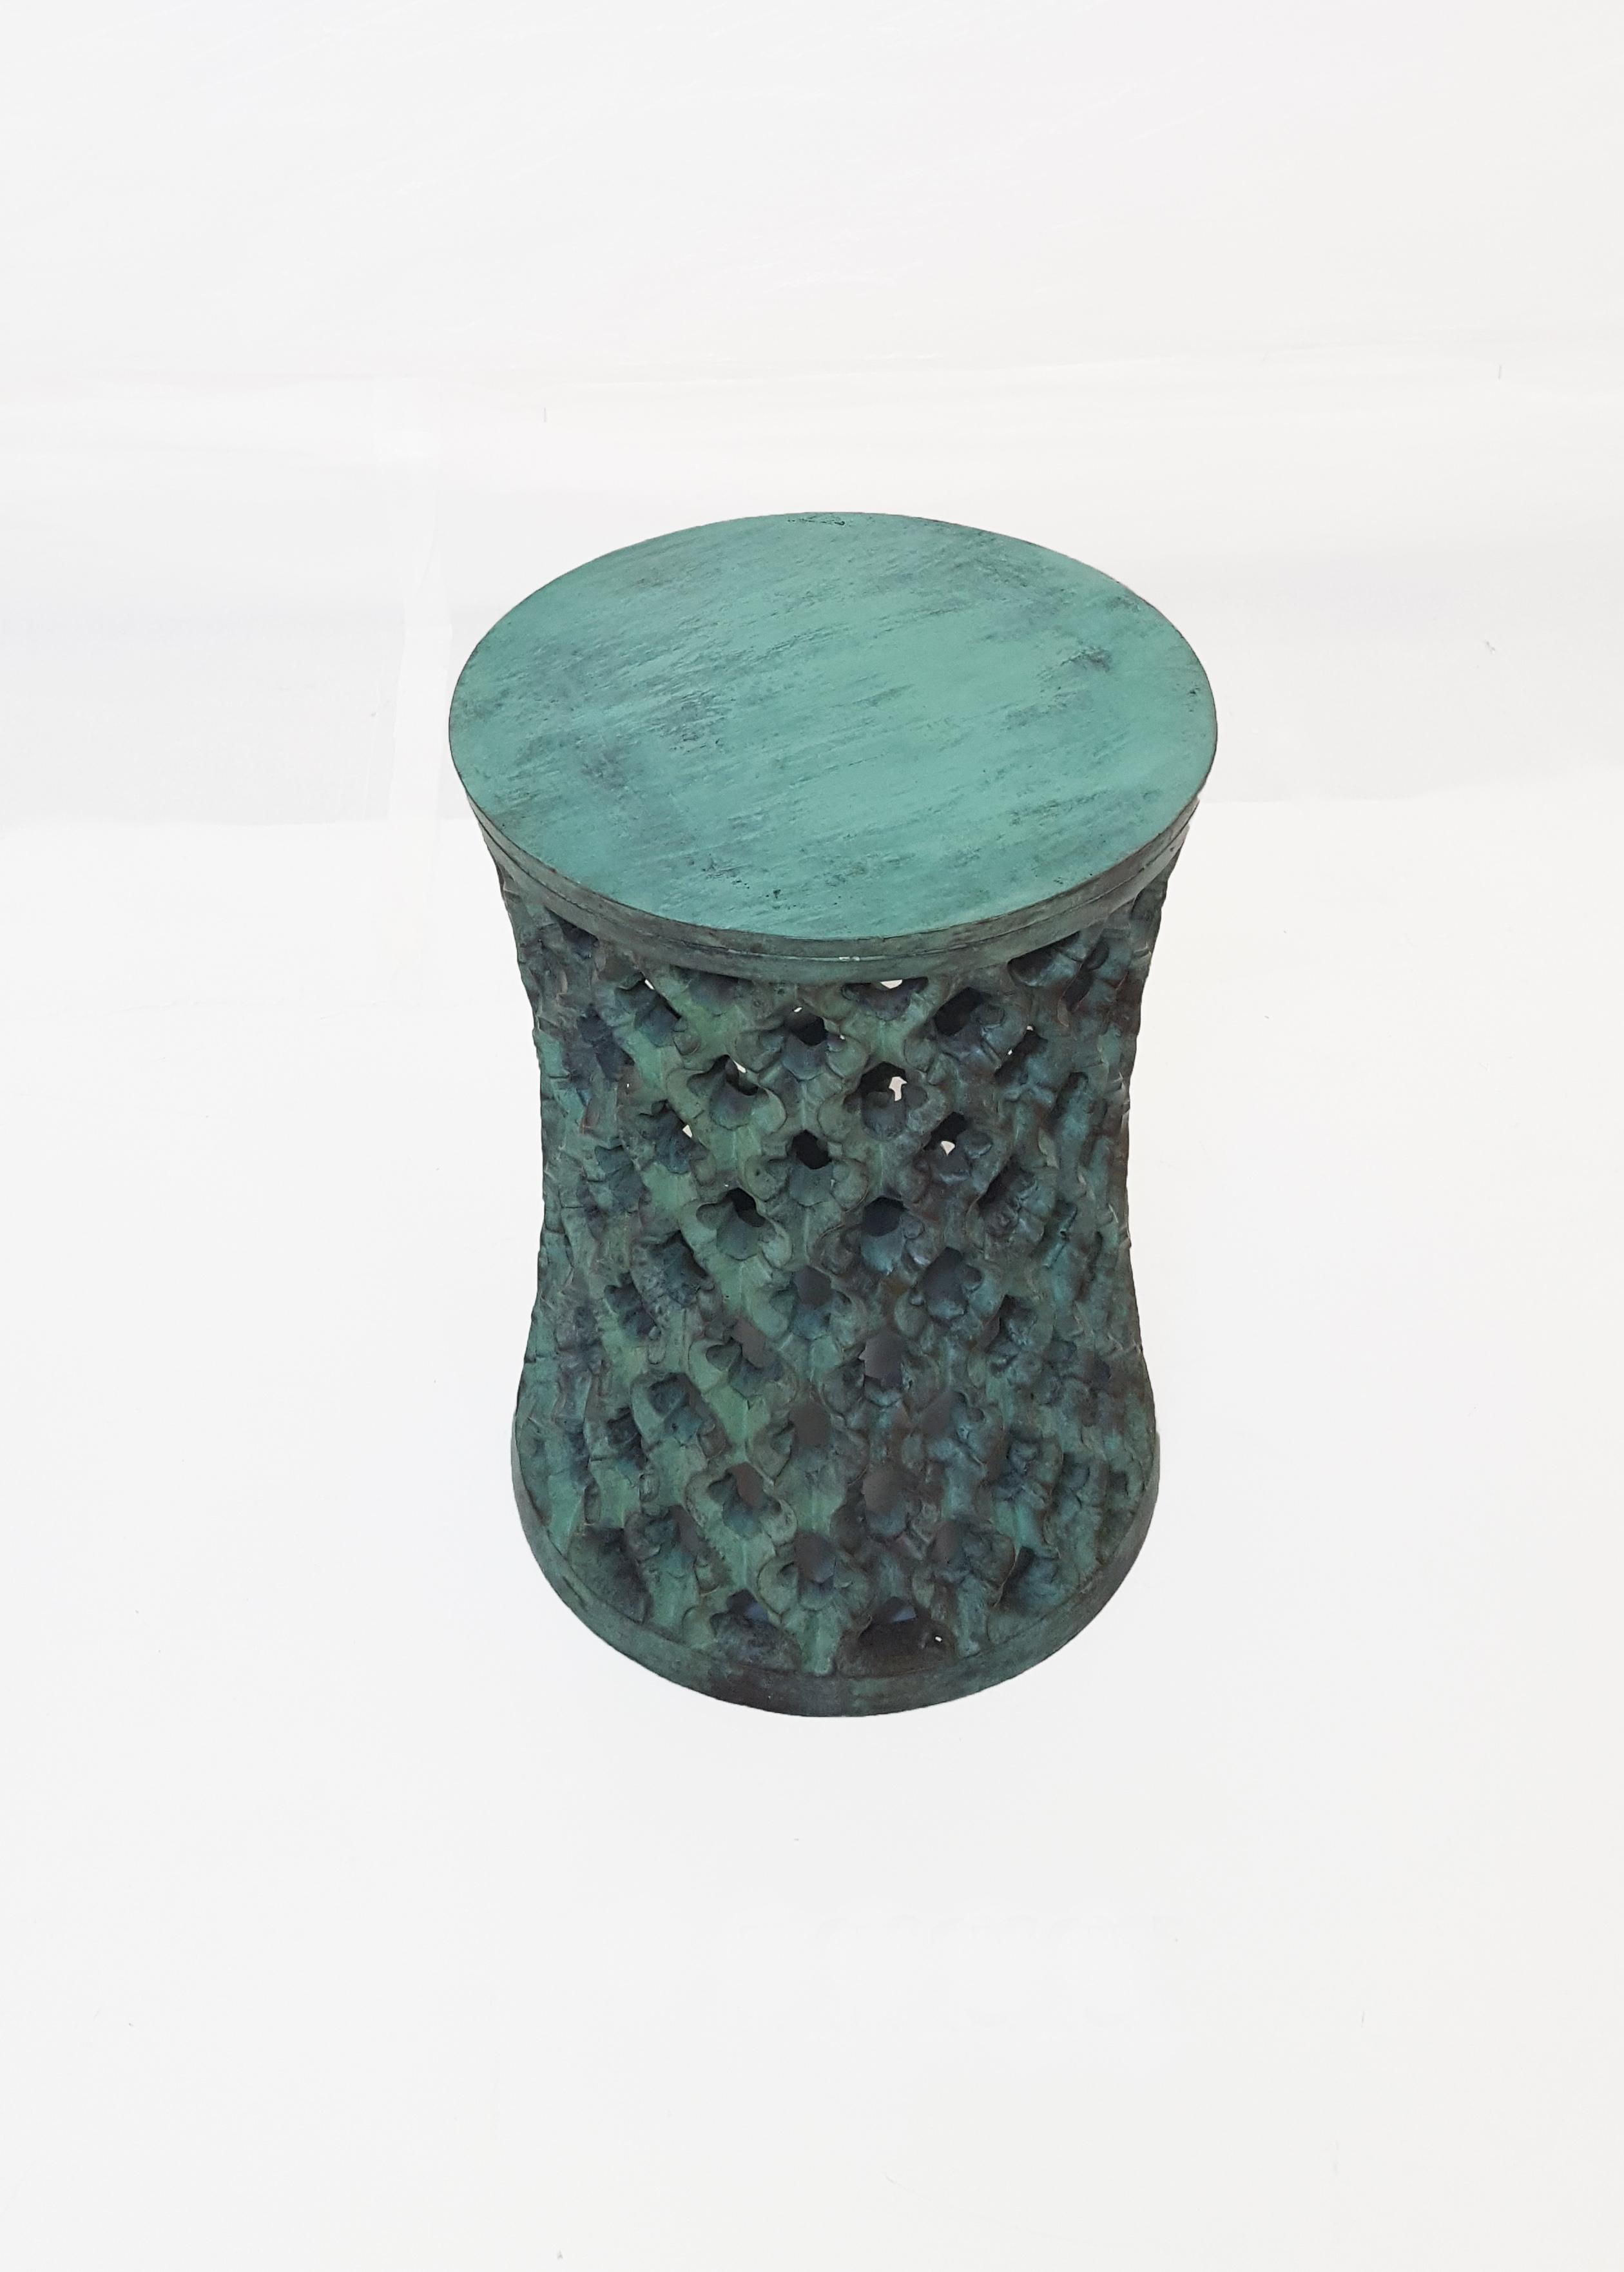 Contemporary Jour Round Jali Table Brass Green Patina by Paul Mathieu for Stephanie Odegard For Sale